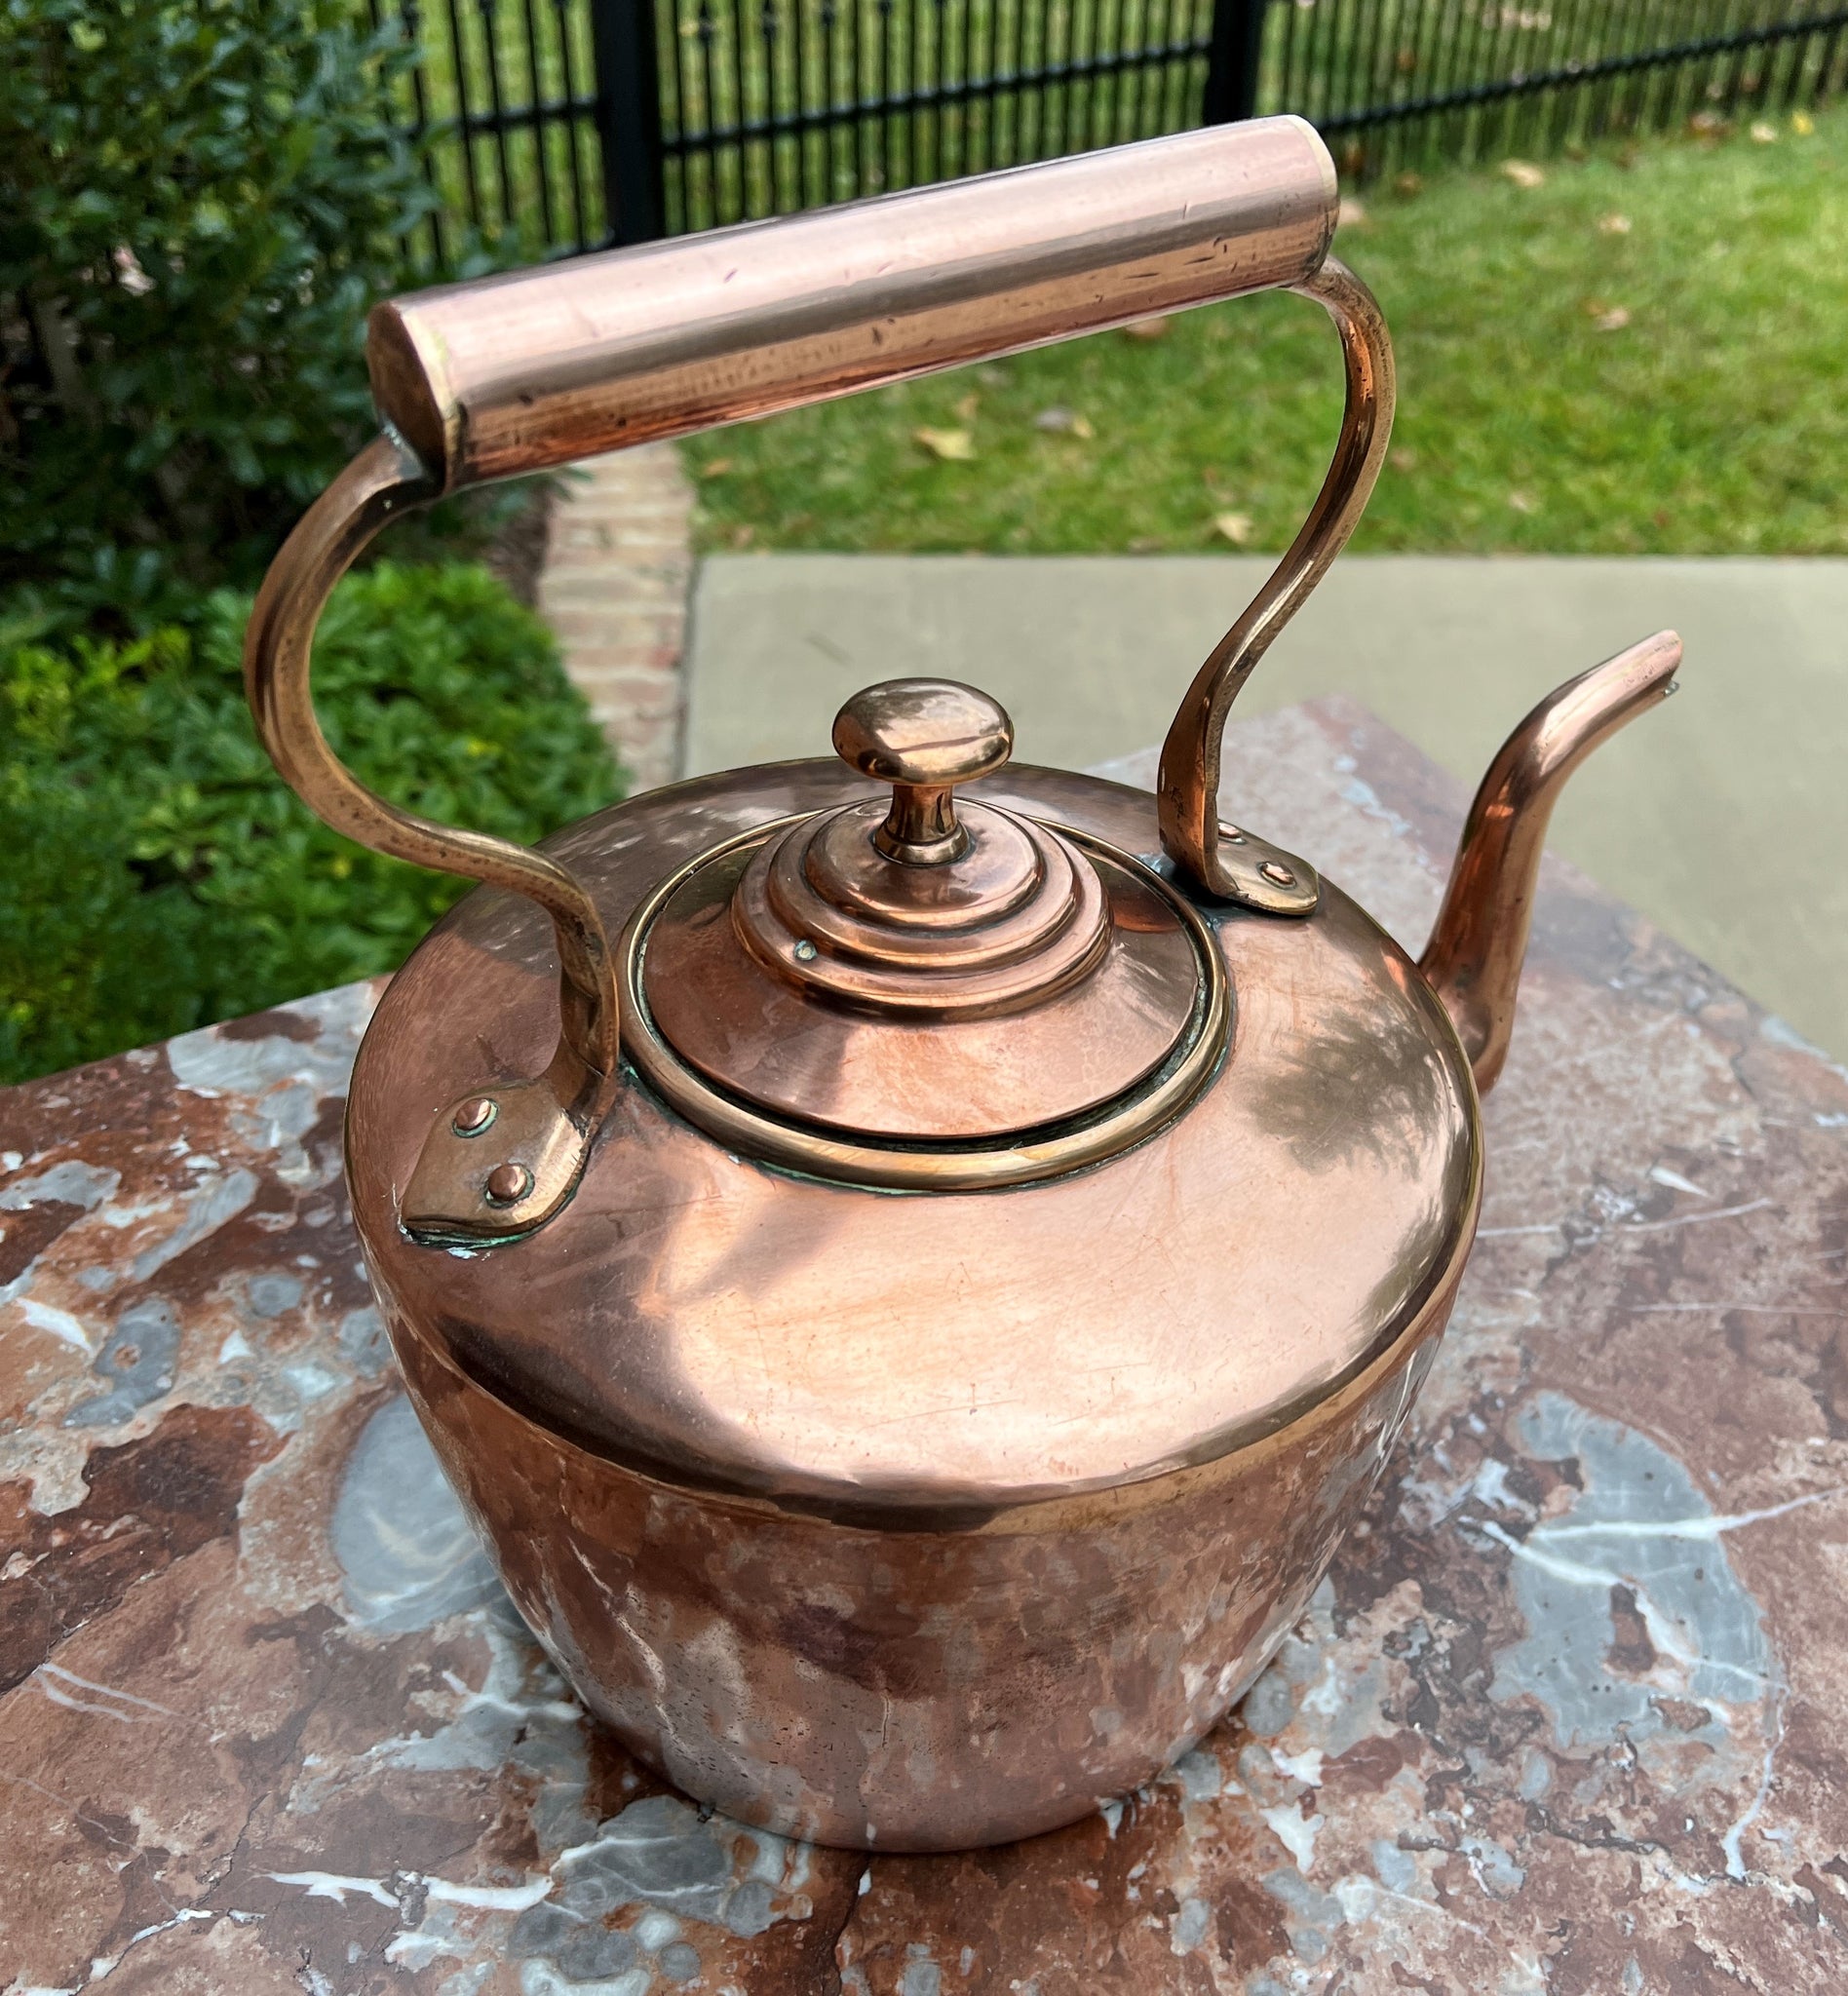 Vintage Copper Coffee/Tea Carafe Pot with Warming Stand